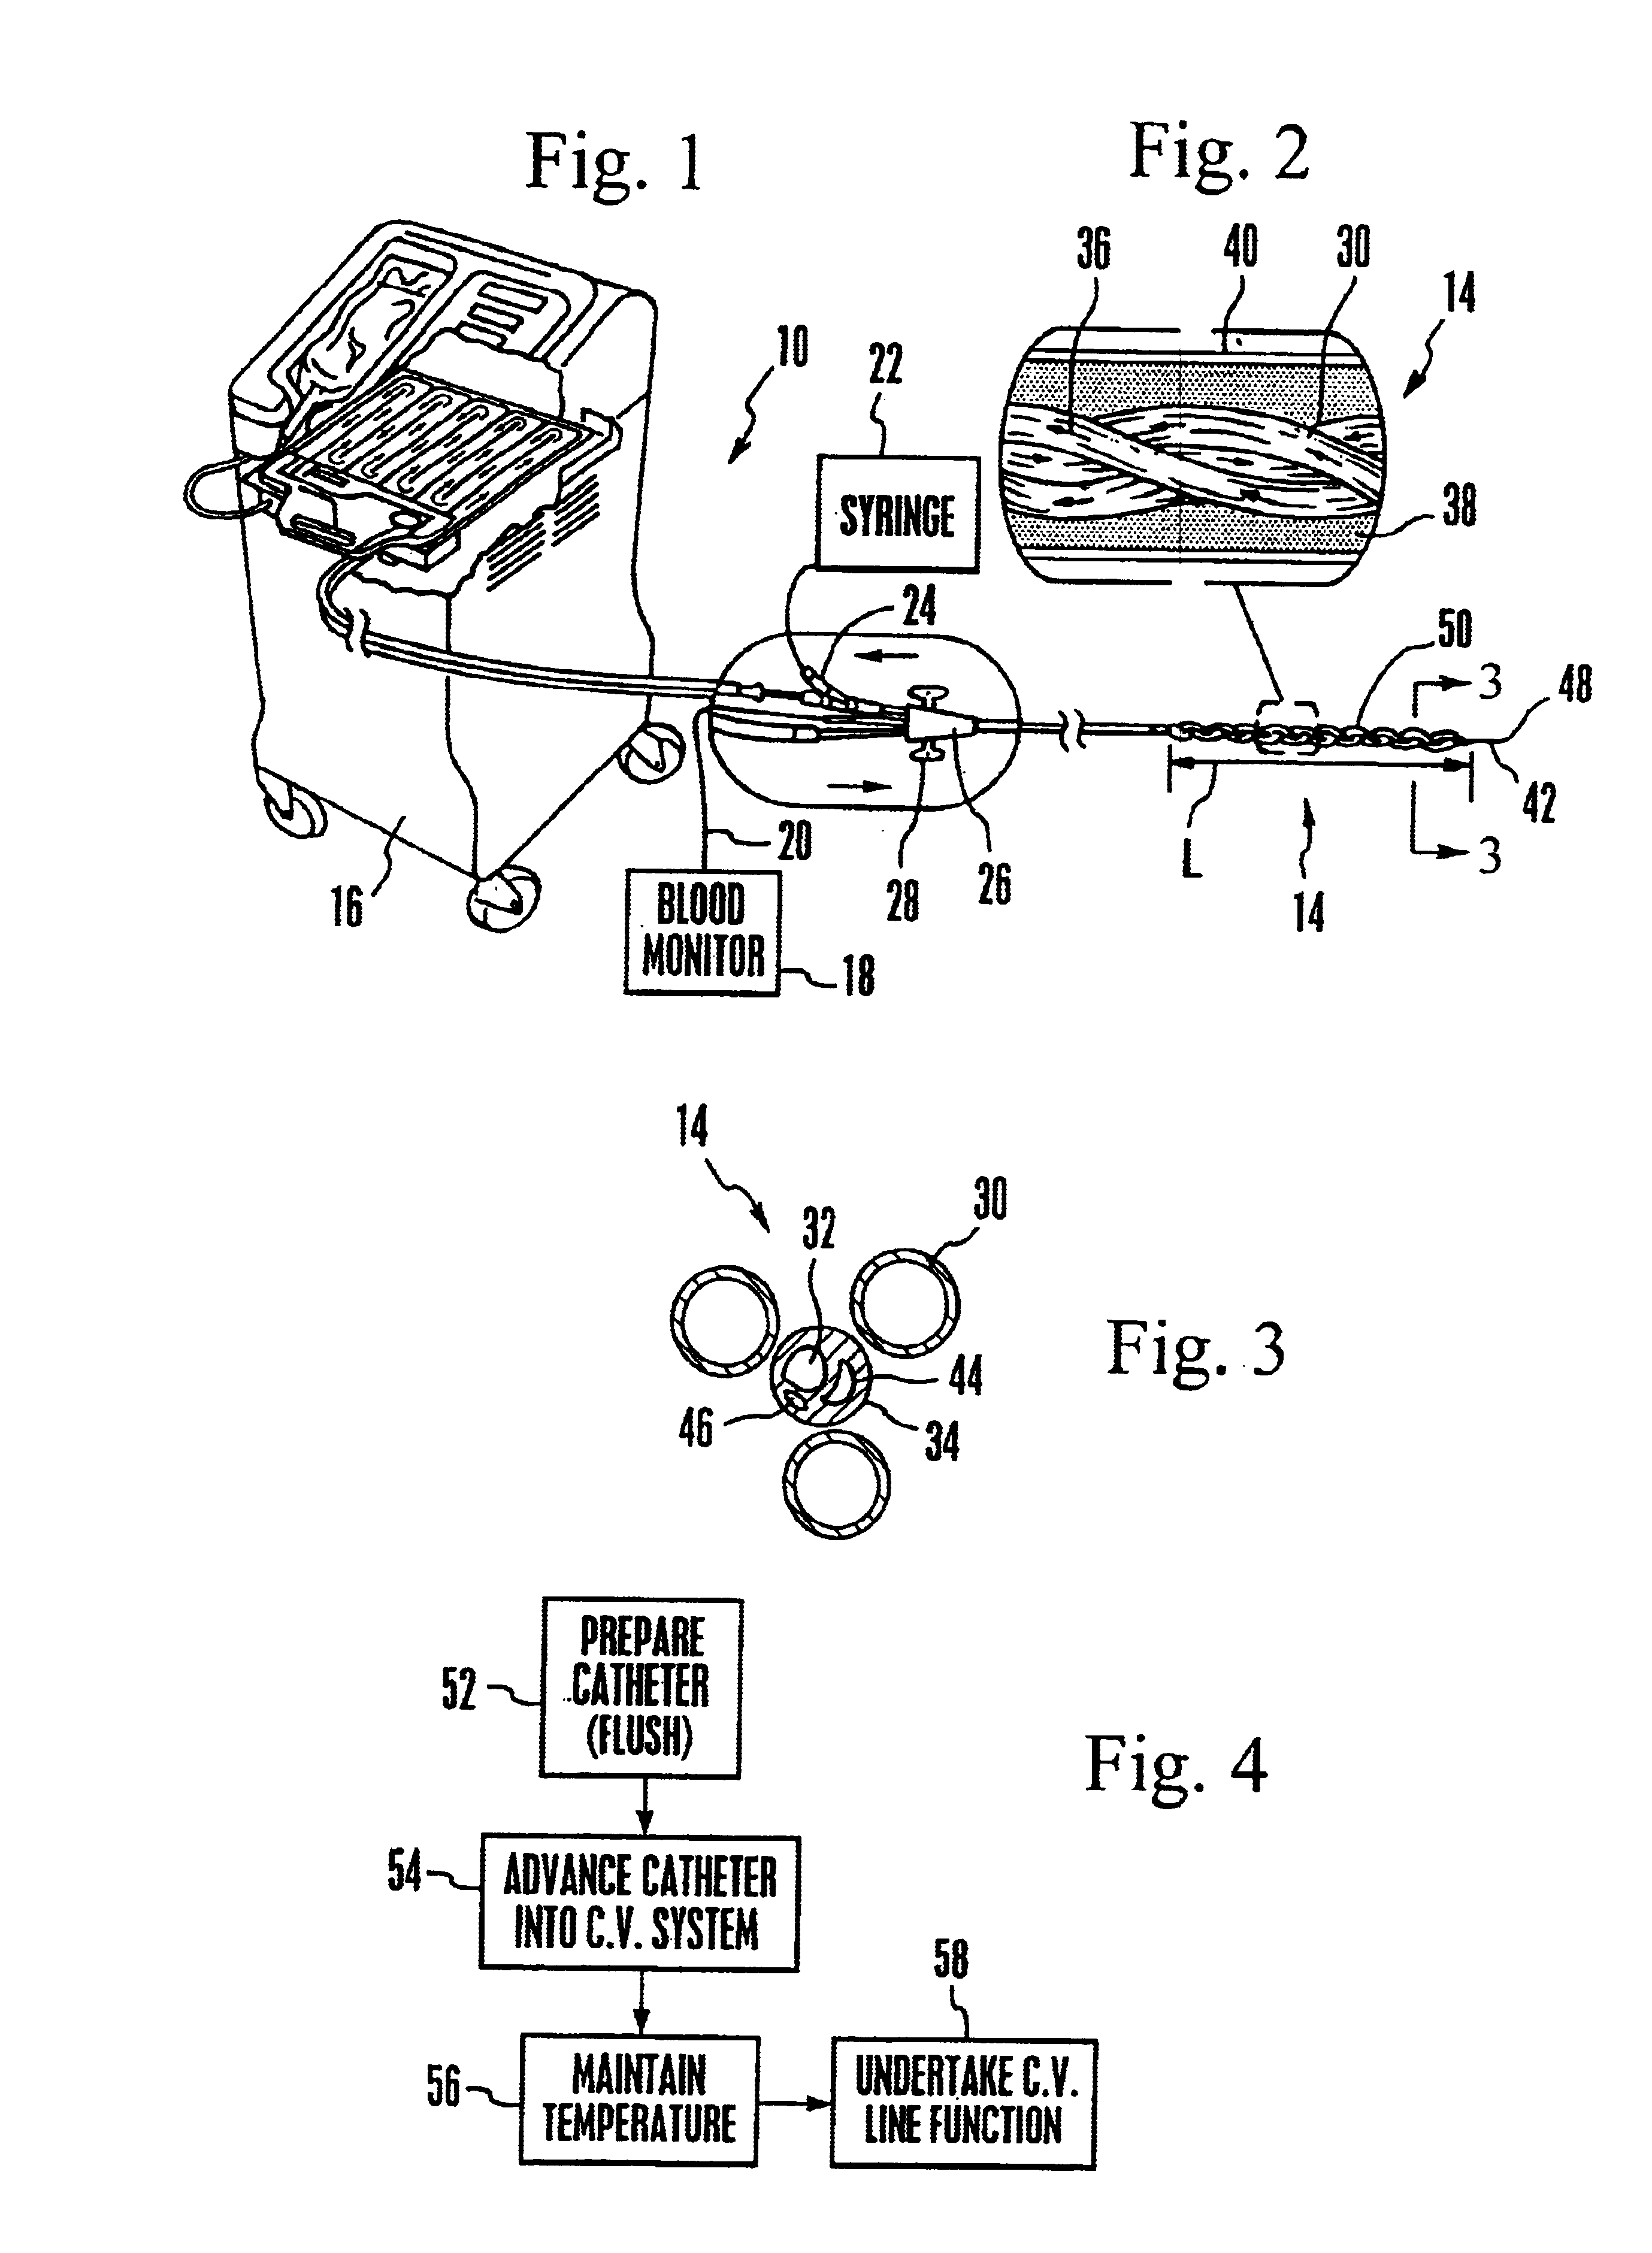 Method and system for patient temperature management and central venous access